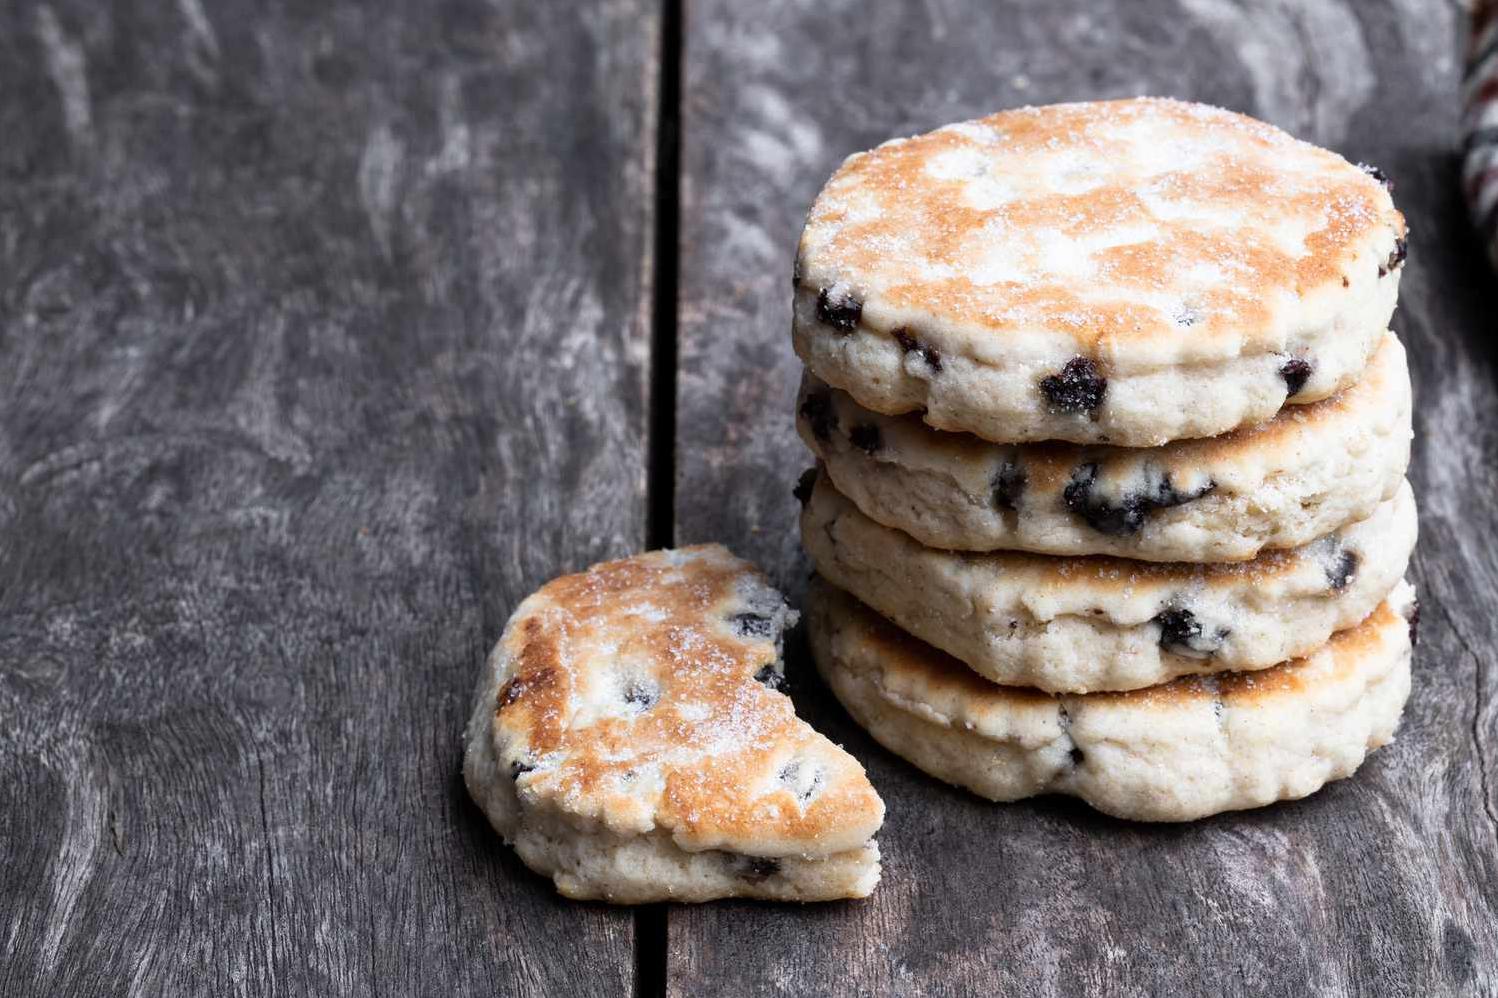  Golden brown and buttery, these Welsh Cakes are a delight to behold!